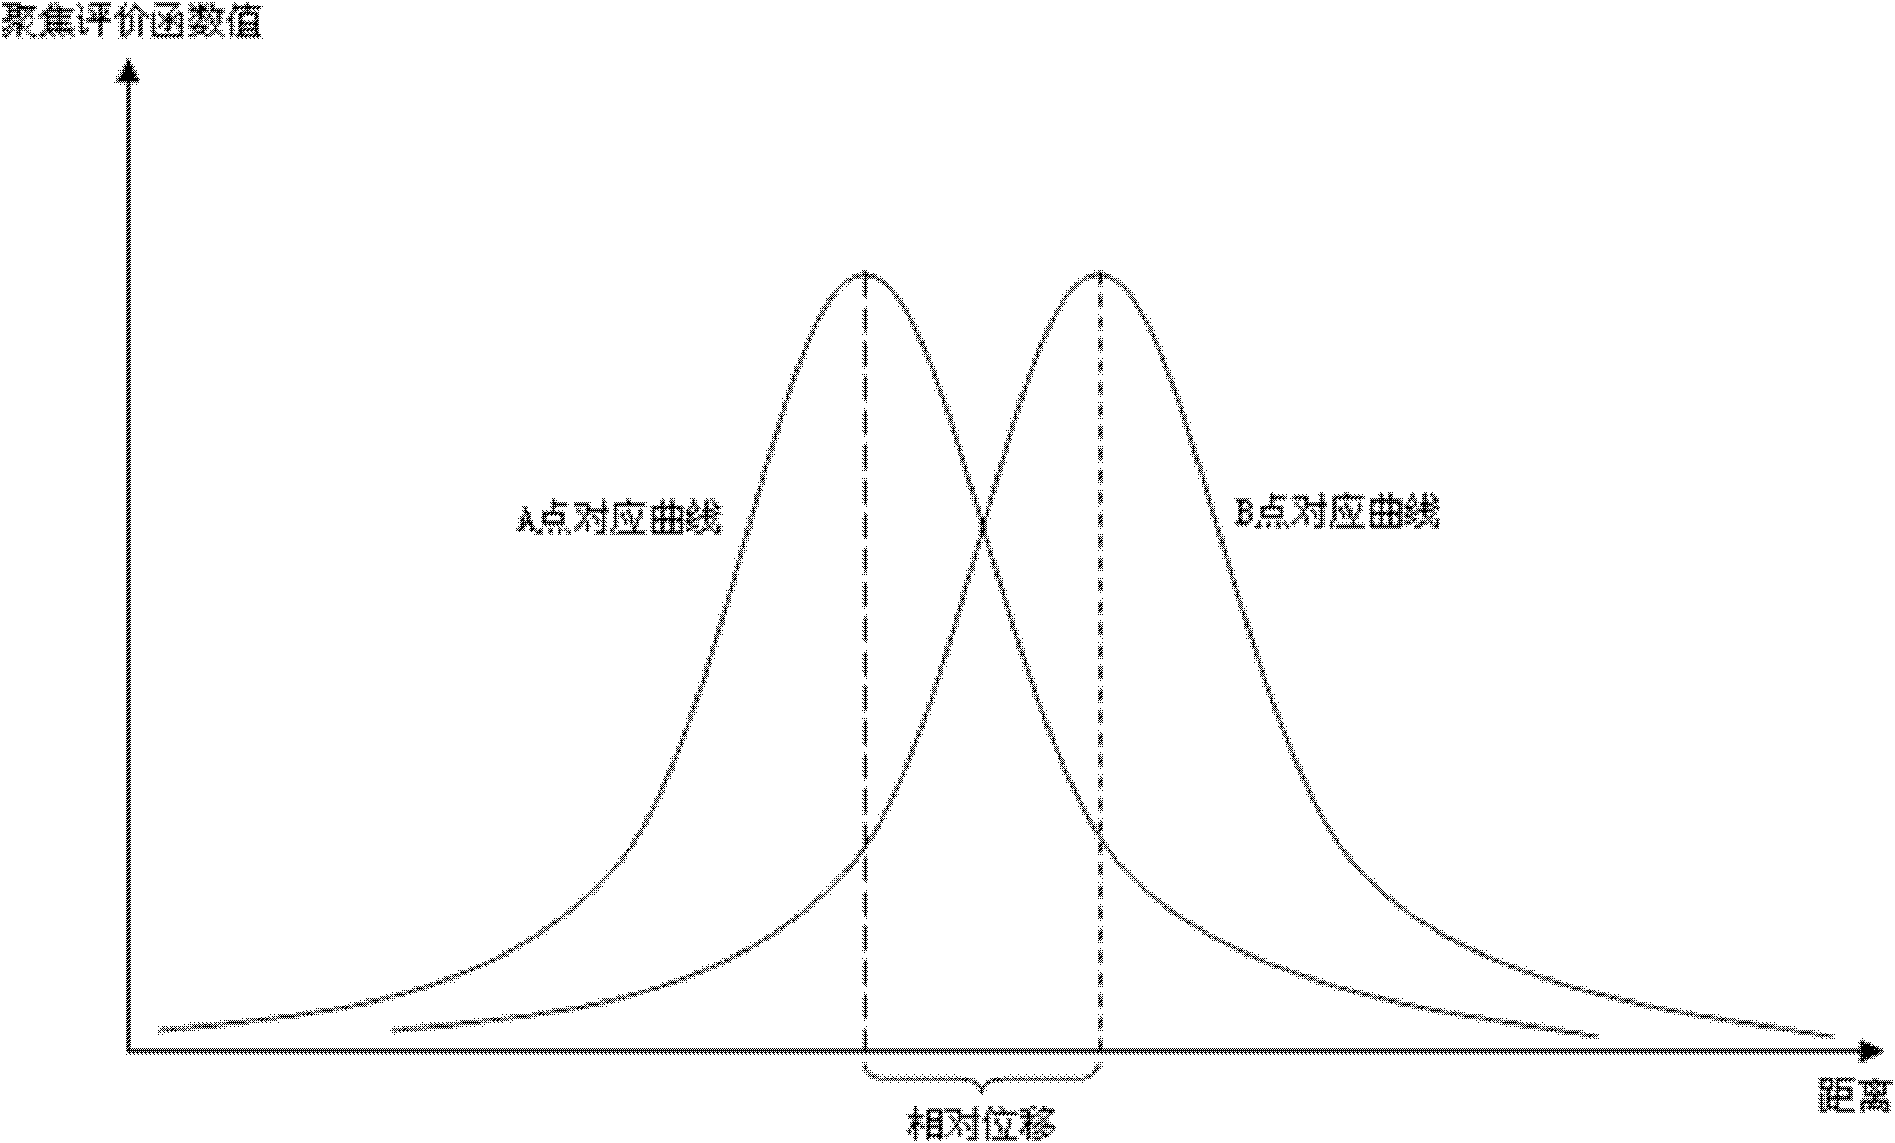 Method for measuring object surface appearance based on digital picture method